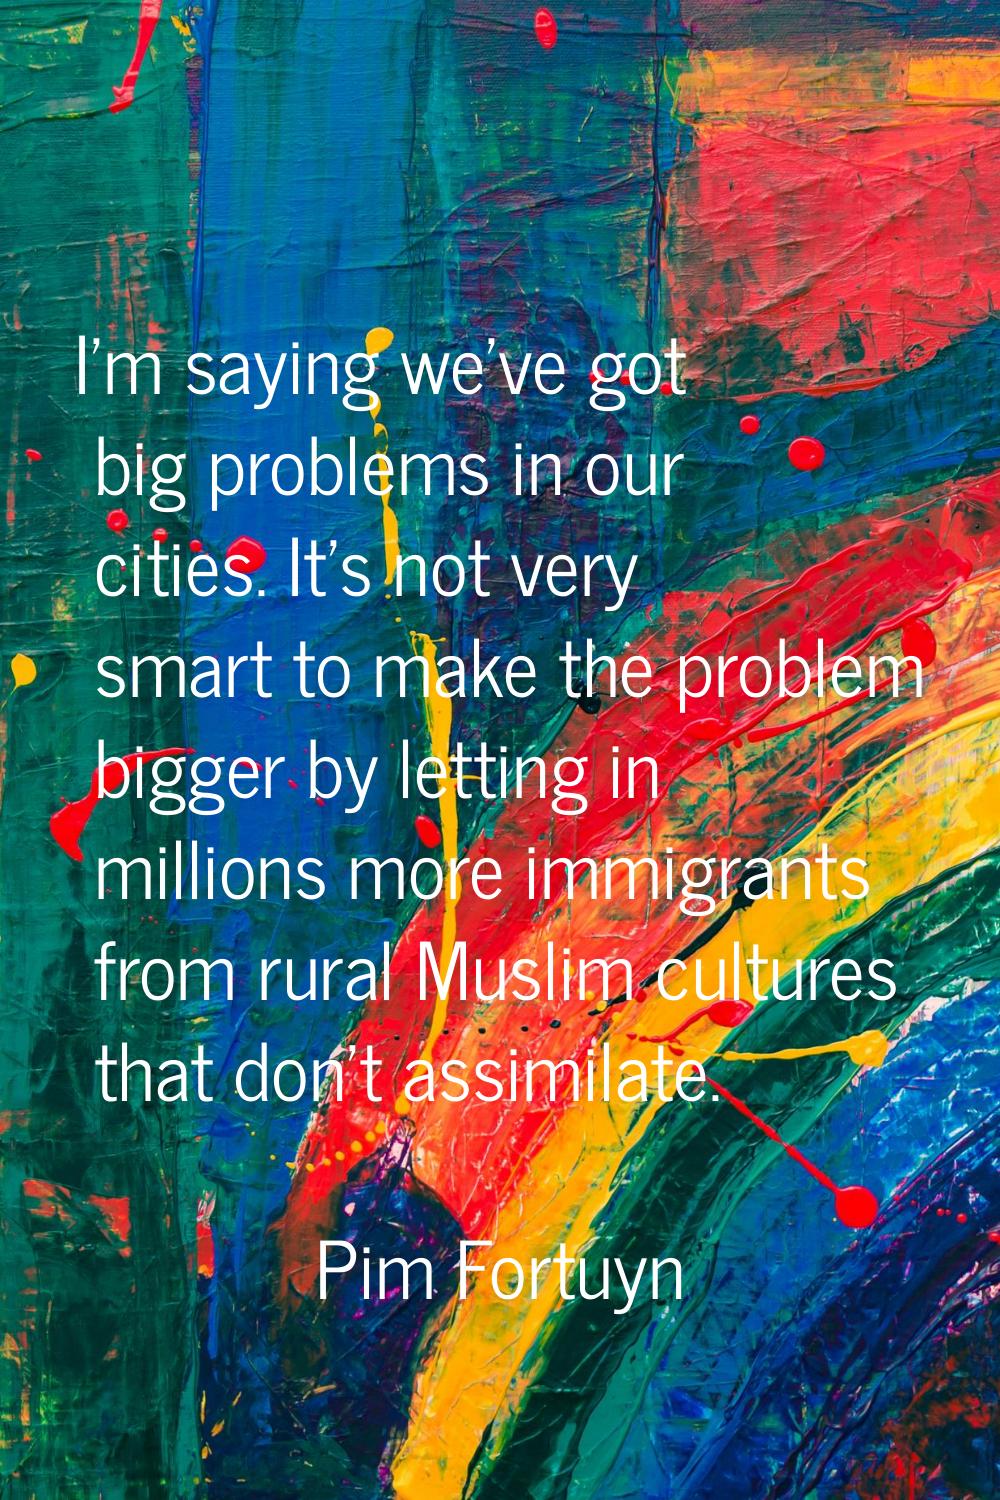 I'm saying we've got big problems in our cities. It's not very smart to make the problem bigger by 